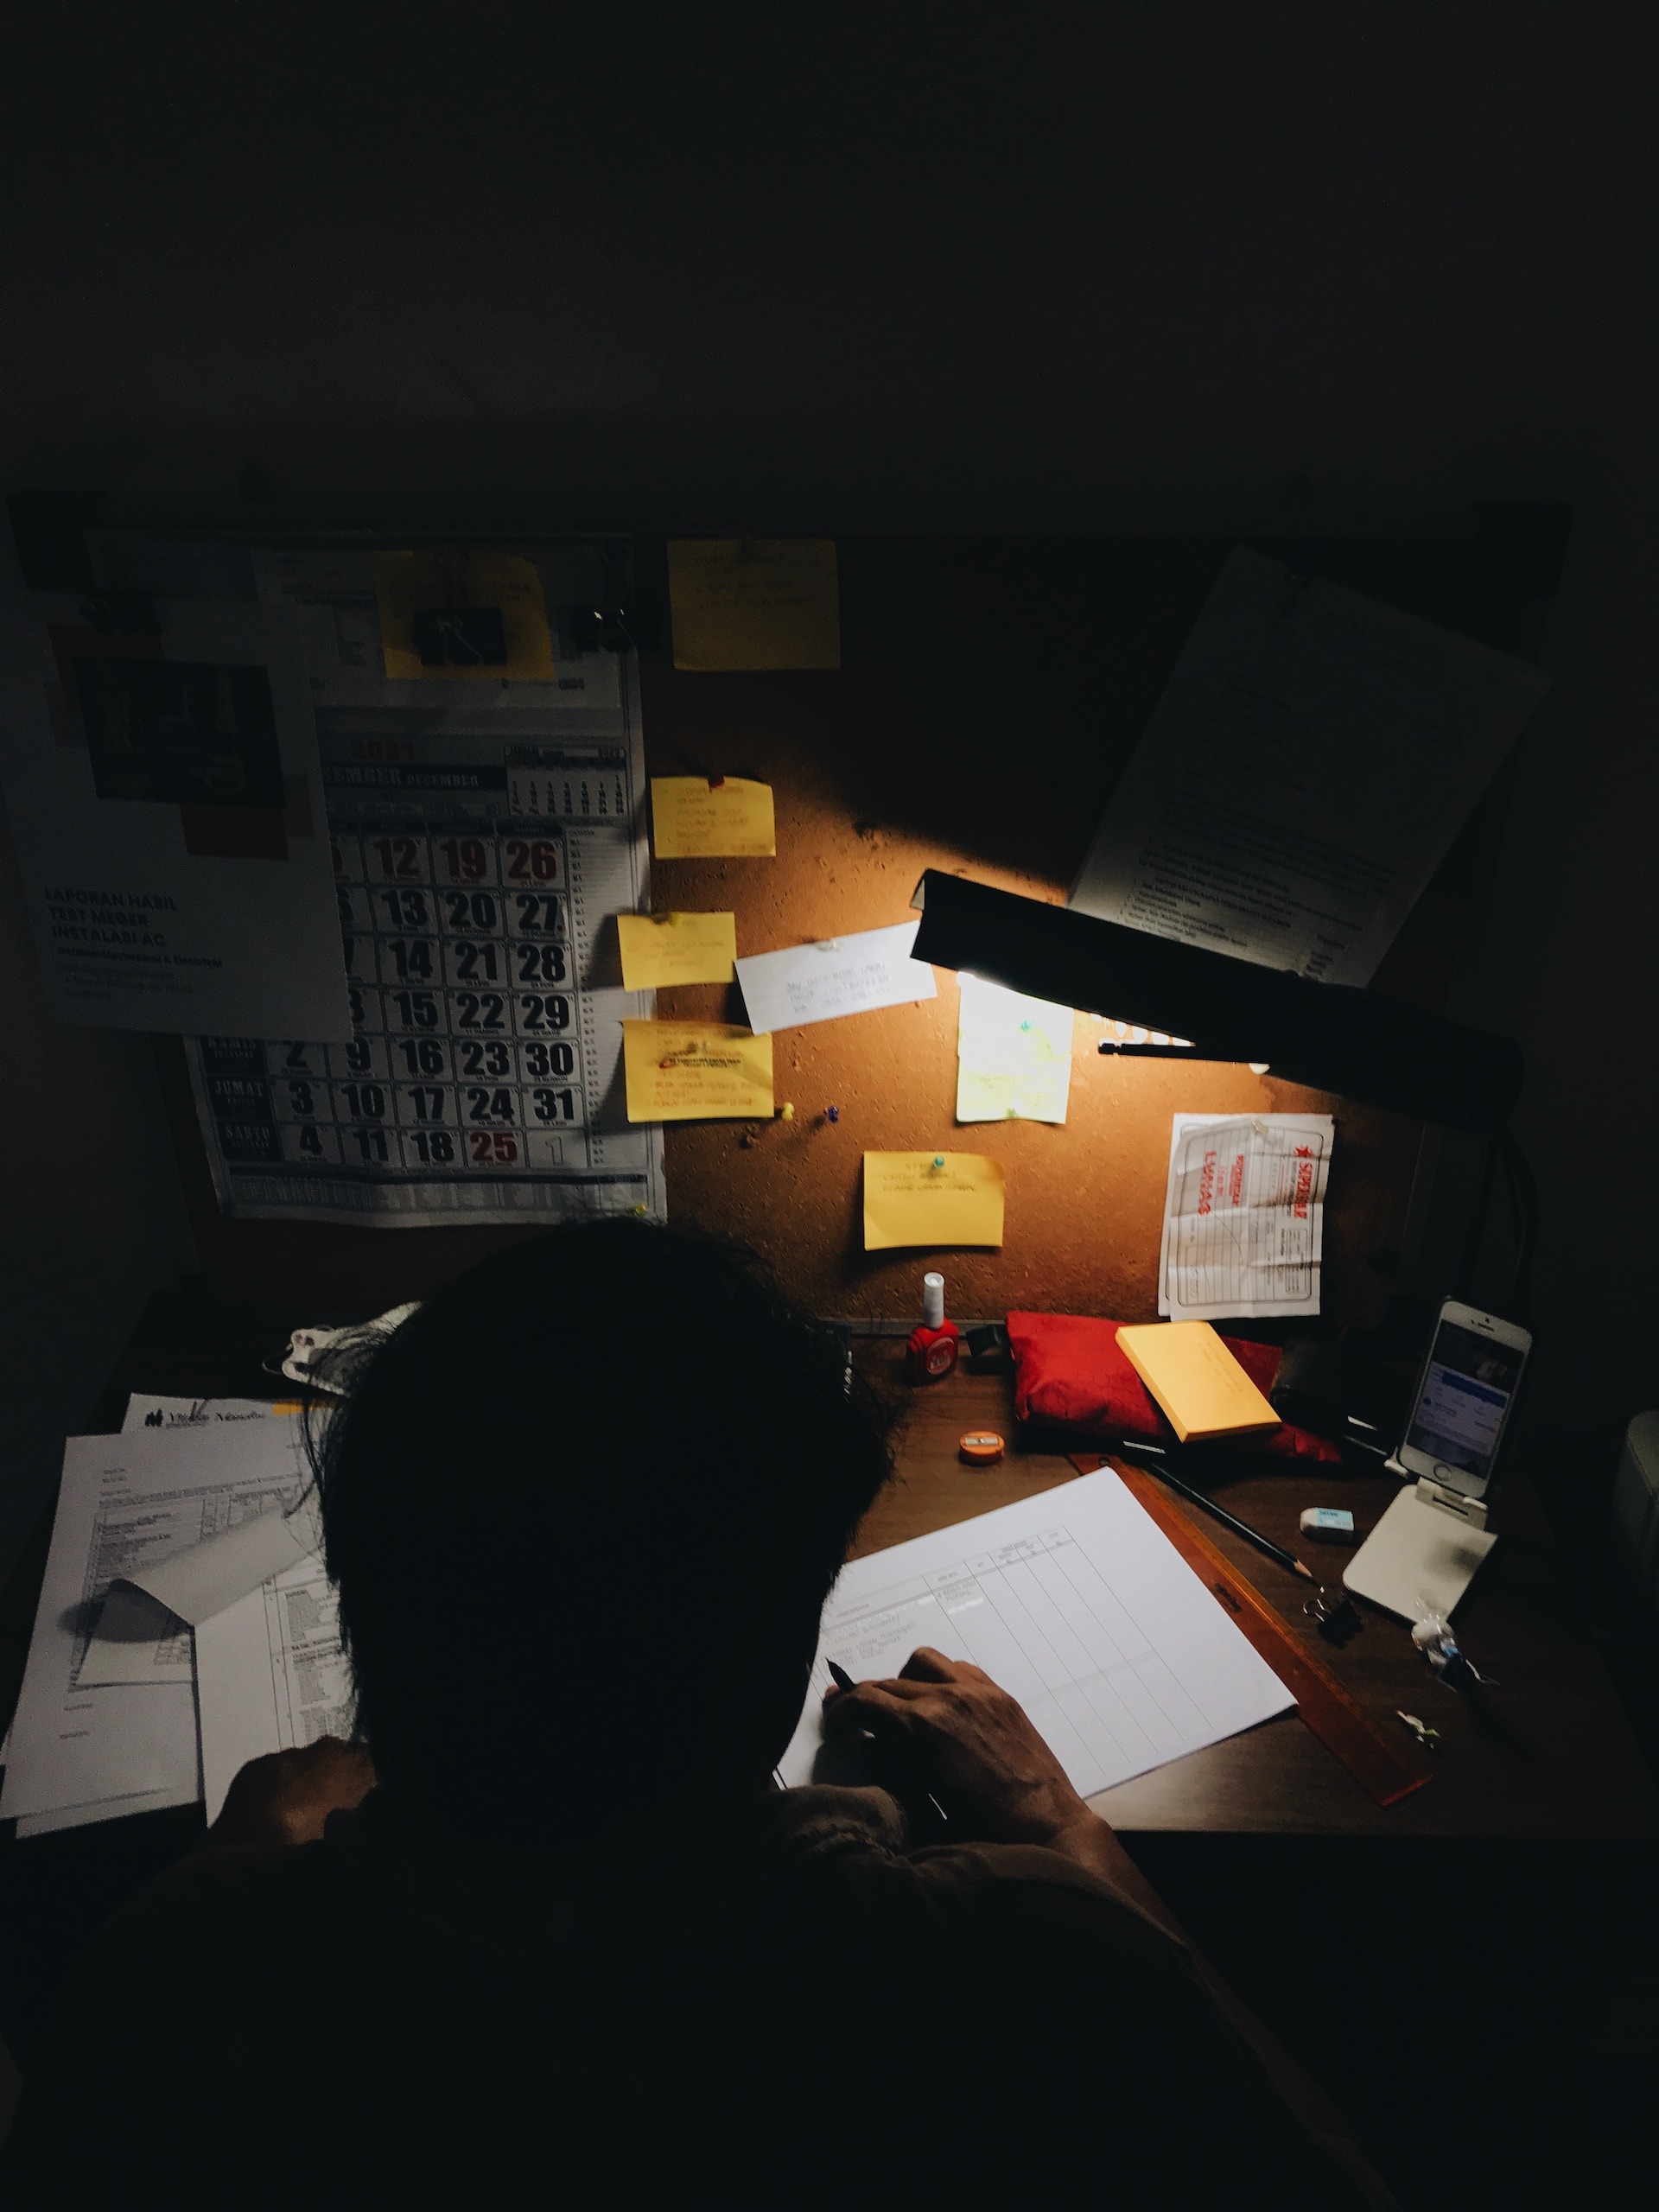 A figure sits at a desk, working in the dark under a lamp.